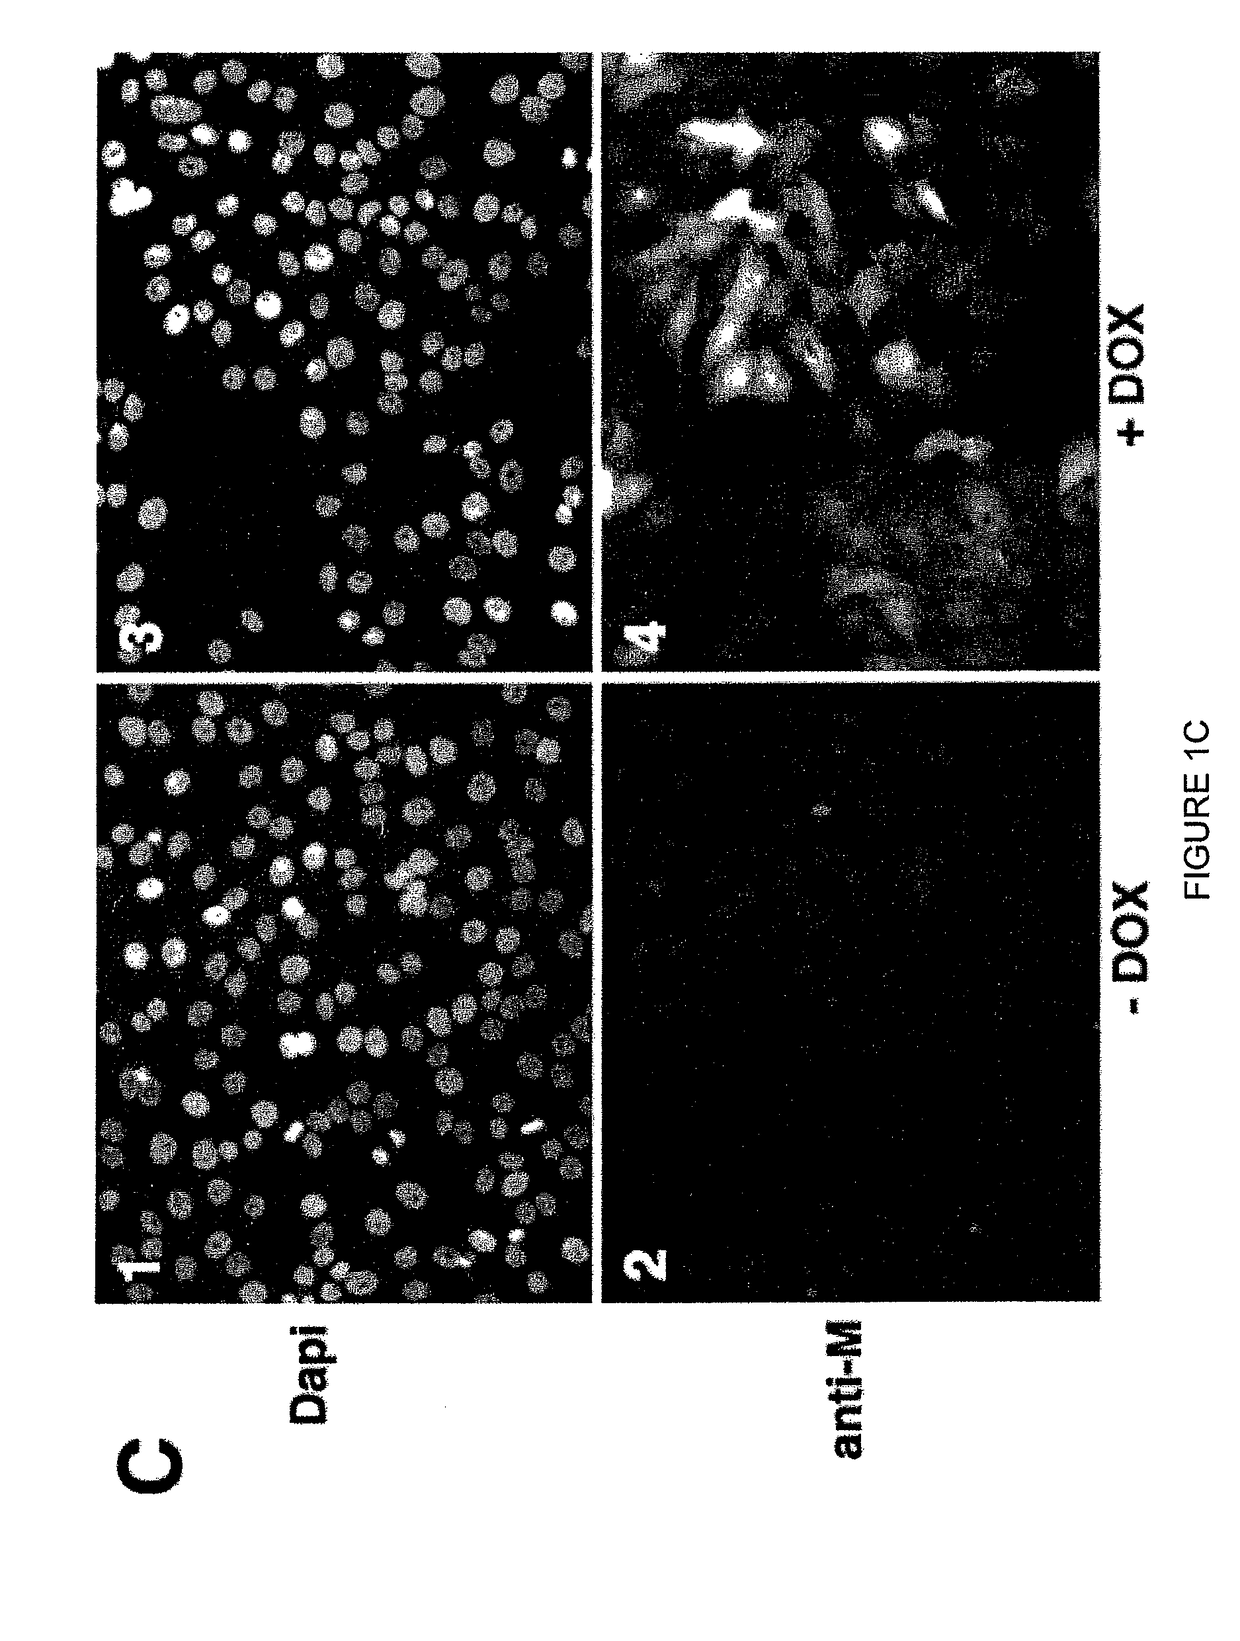 Engineered respiratory syncytial viruses with control of cell-to-cell virus transmission for enhanced safety of live virus vaccines